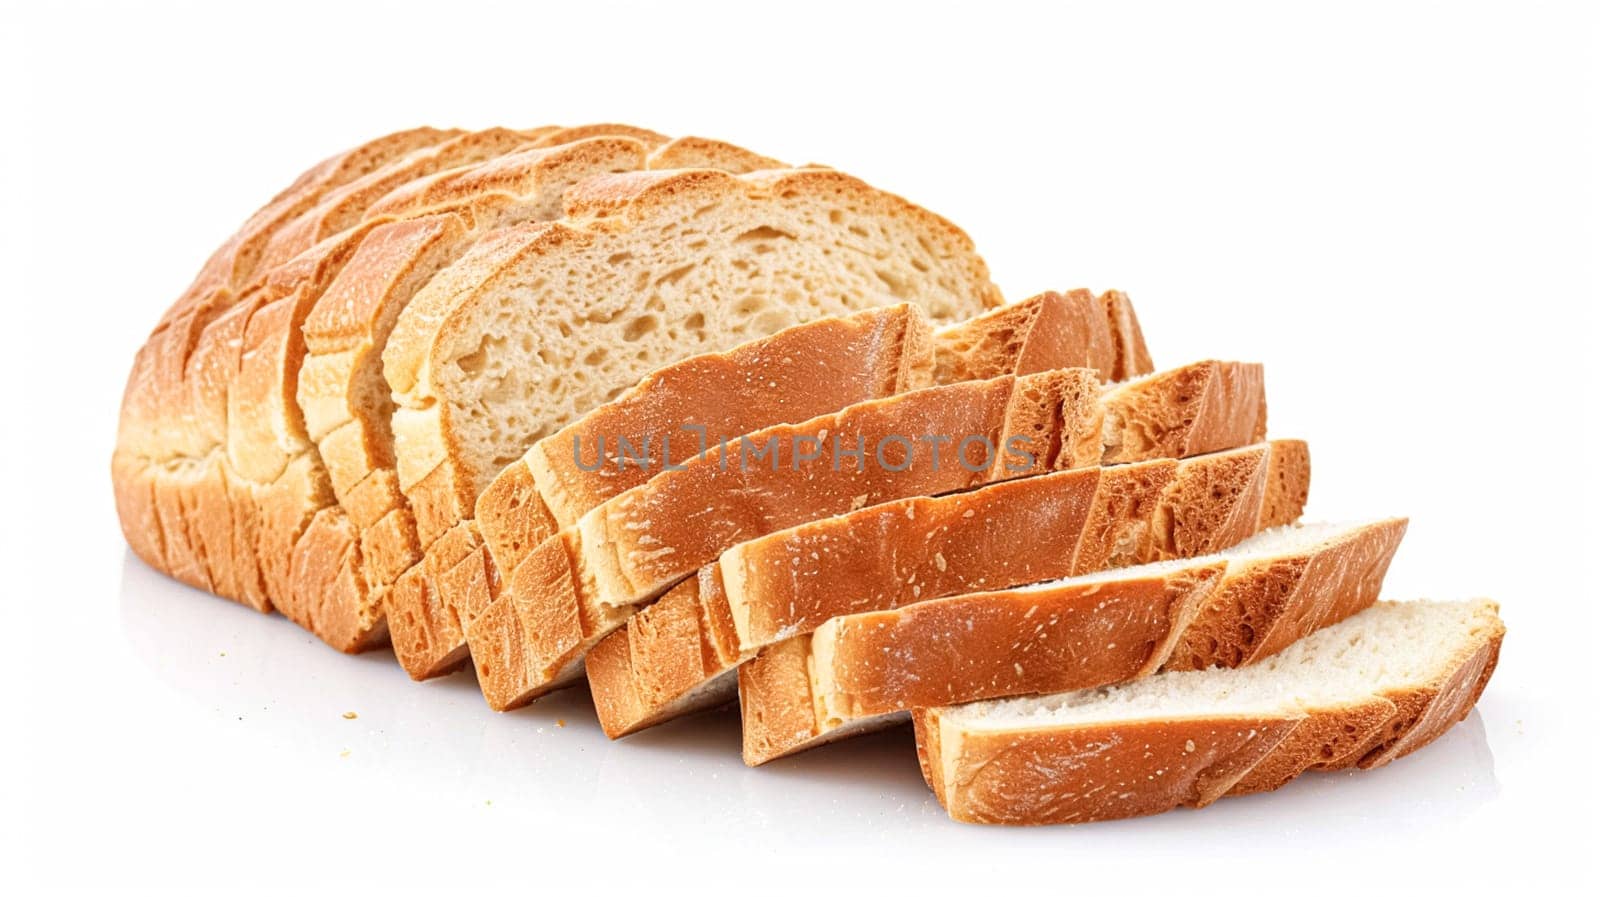 Fresh sliced bread isolated on white background, baking goods and supermarket packaging, farm shop organic baked bread by Anneleven